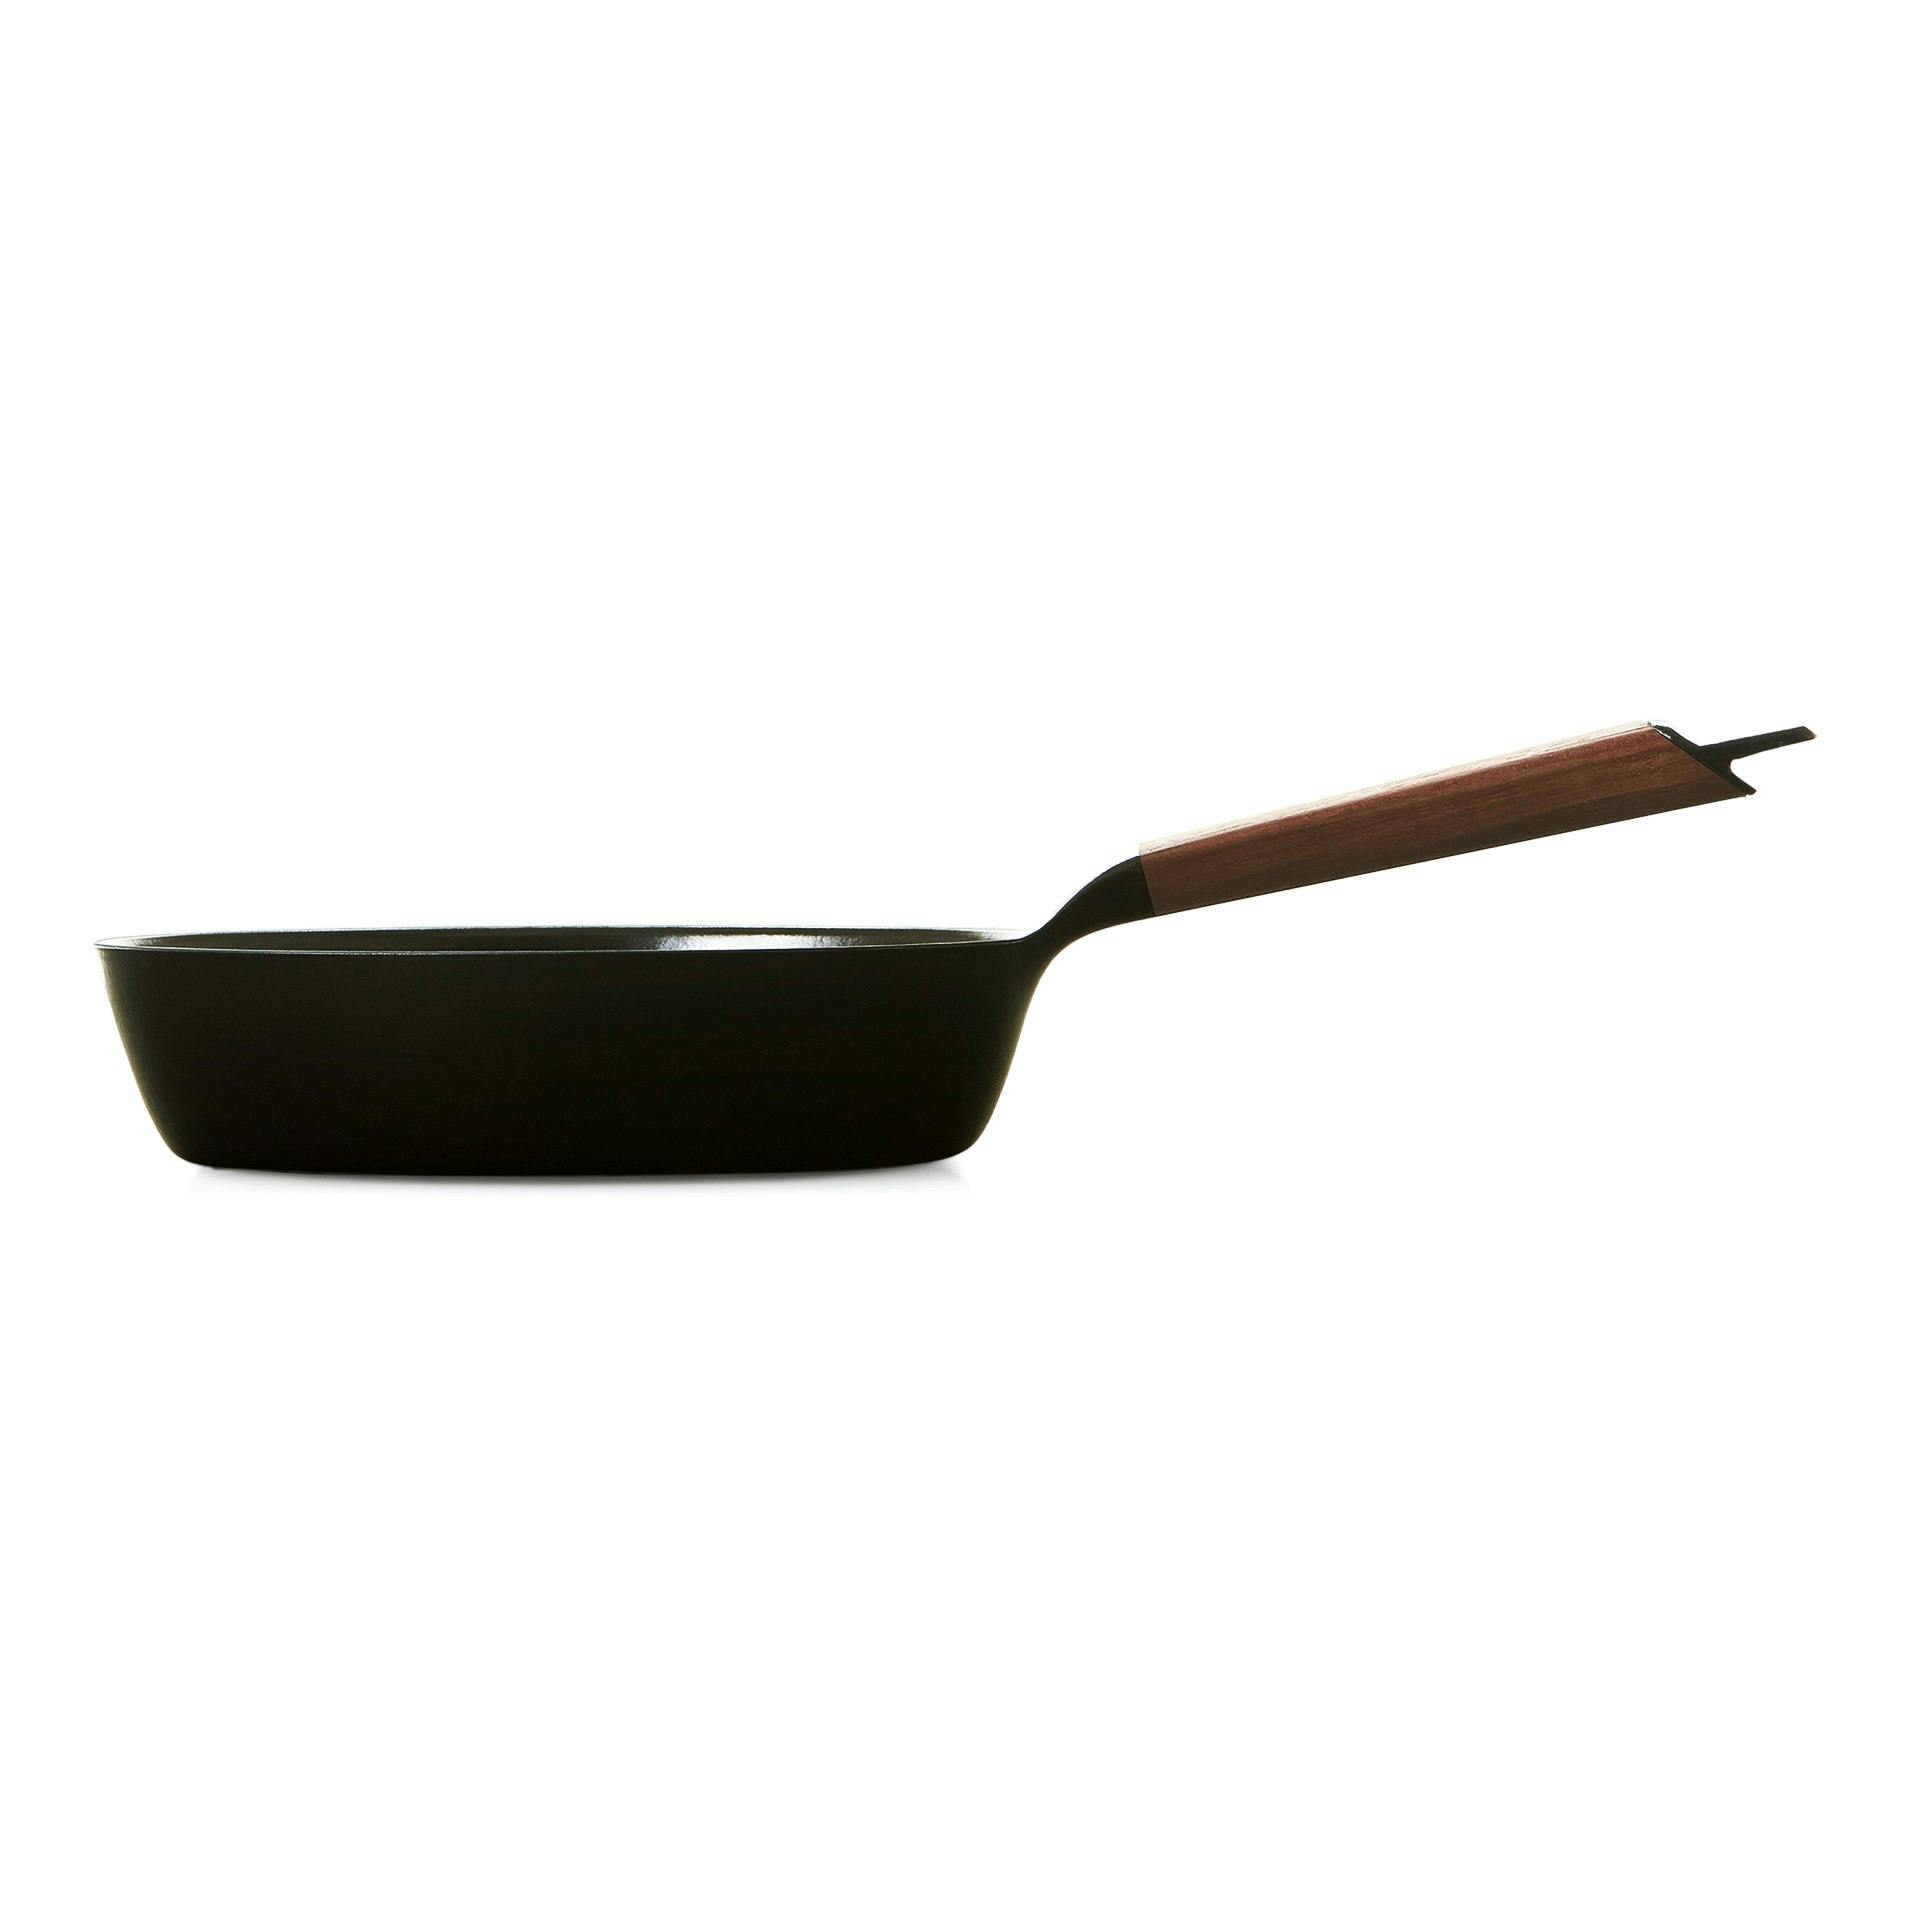 Vermicular Cast Iron Deep Frying Pan with Lid - 9.4"